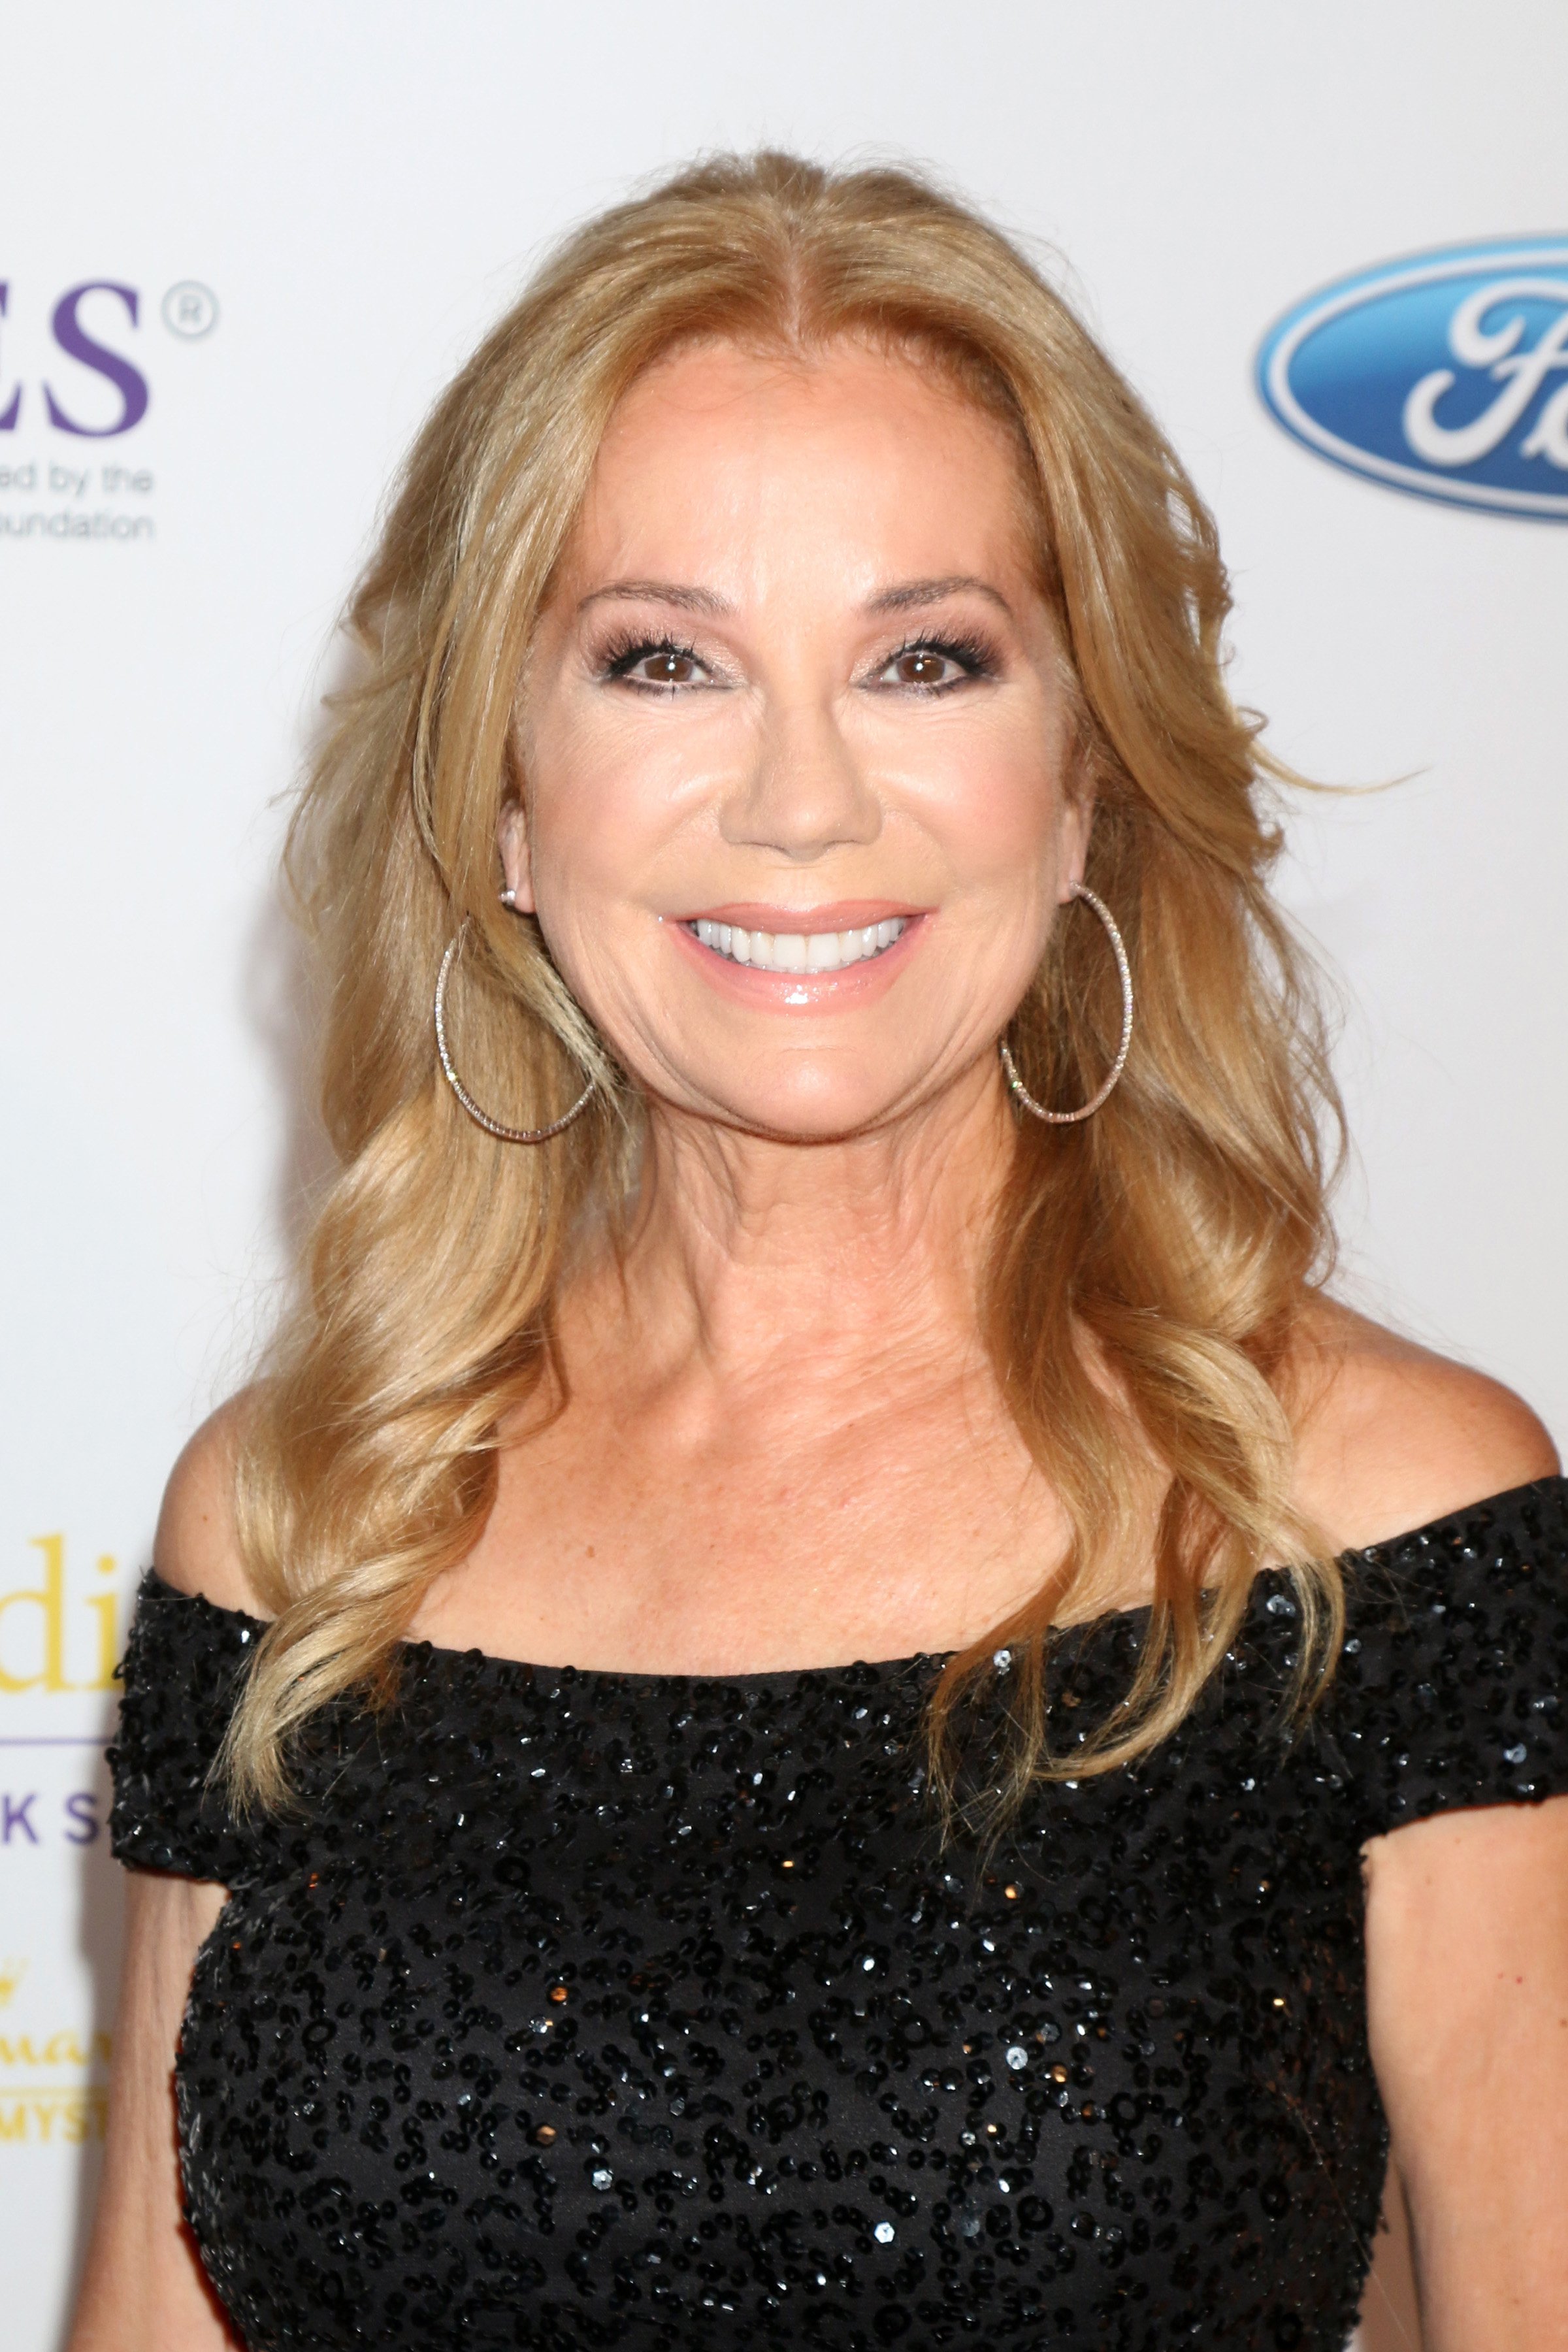  Kathie Lee Gifford at the 41st Annual Gracie Awards Gala on May 24, 2016 | Photo: Shutterstock